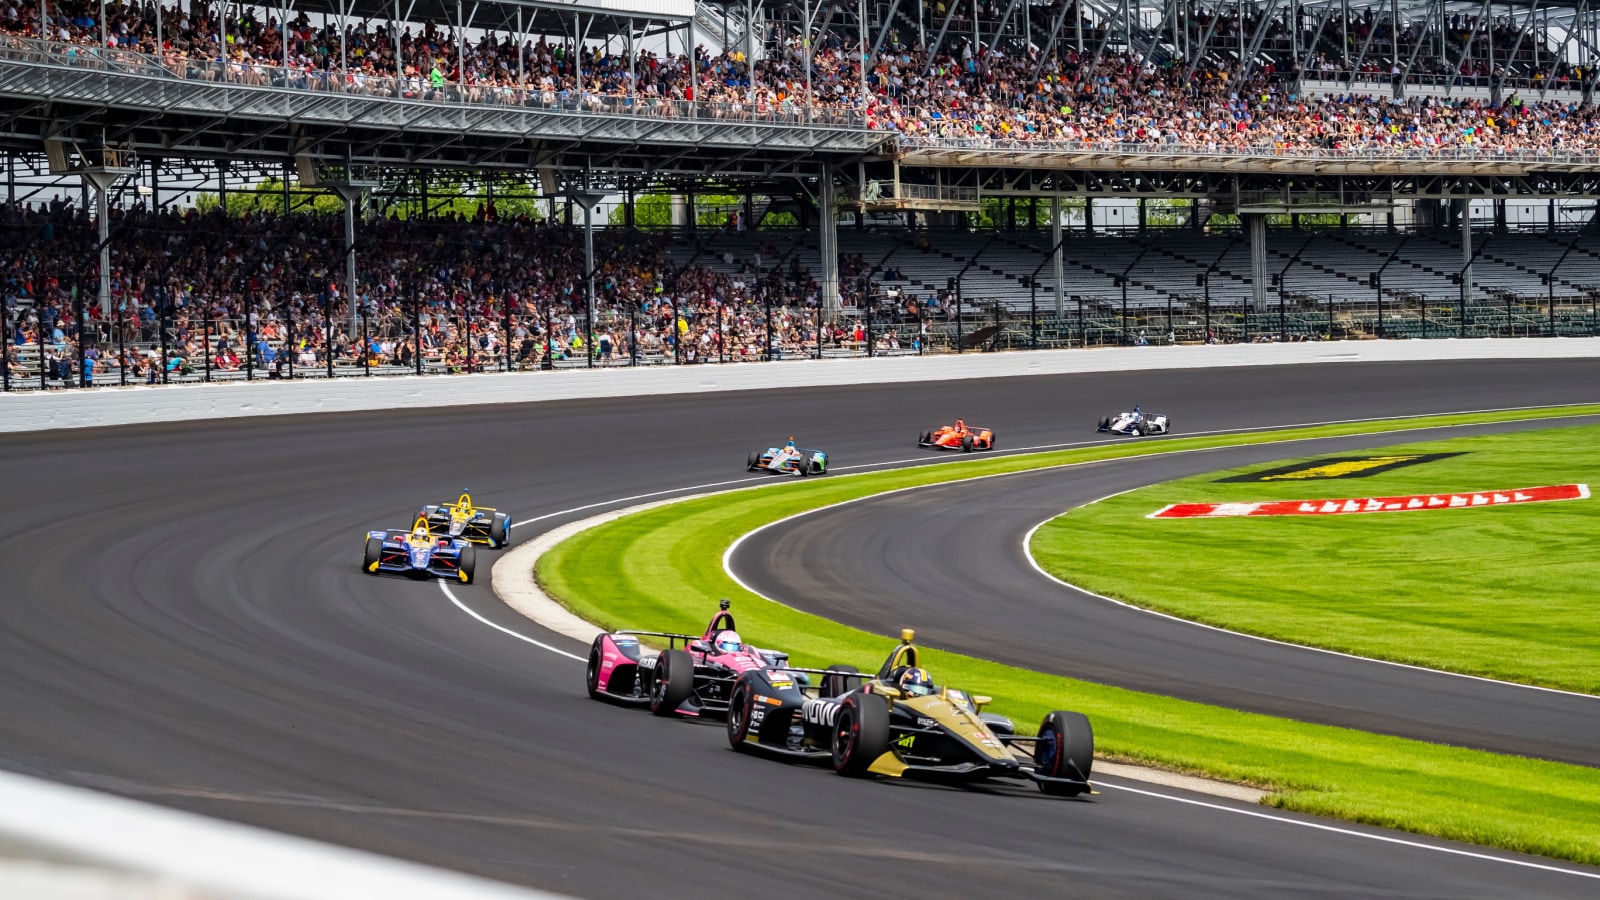 May 24, 2019 Indianapolis, IN: MARCUS ERICSSON (R) (7) of Sweden heads through the turns to practice for the Indianapolis 500 at Indianapolis Motor Speedway in Indianapolis, Indiana.